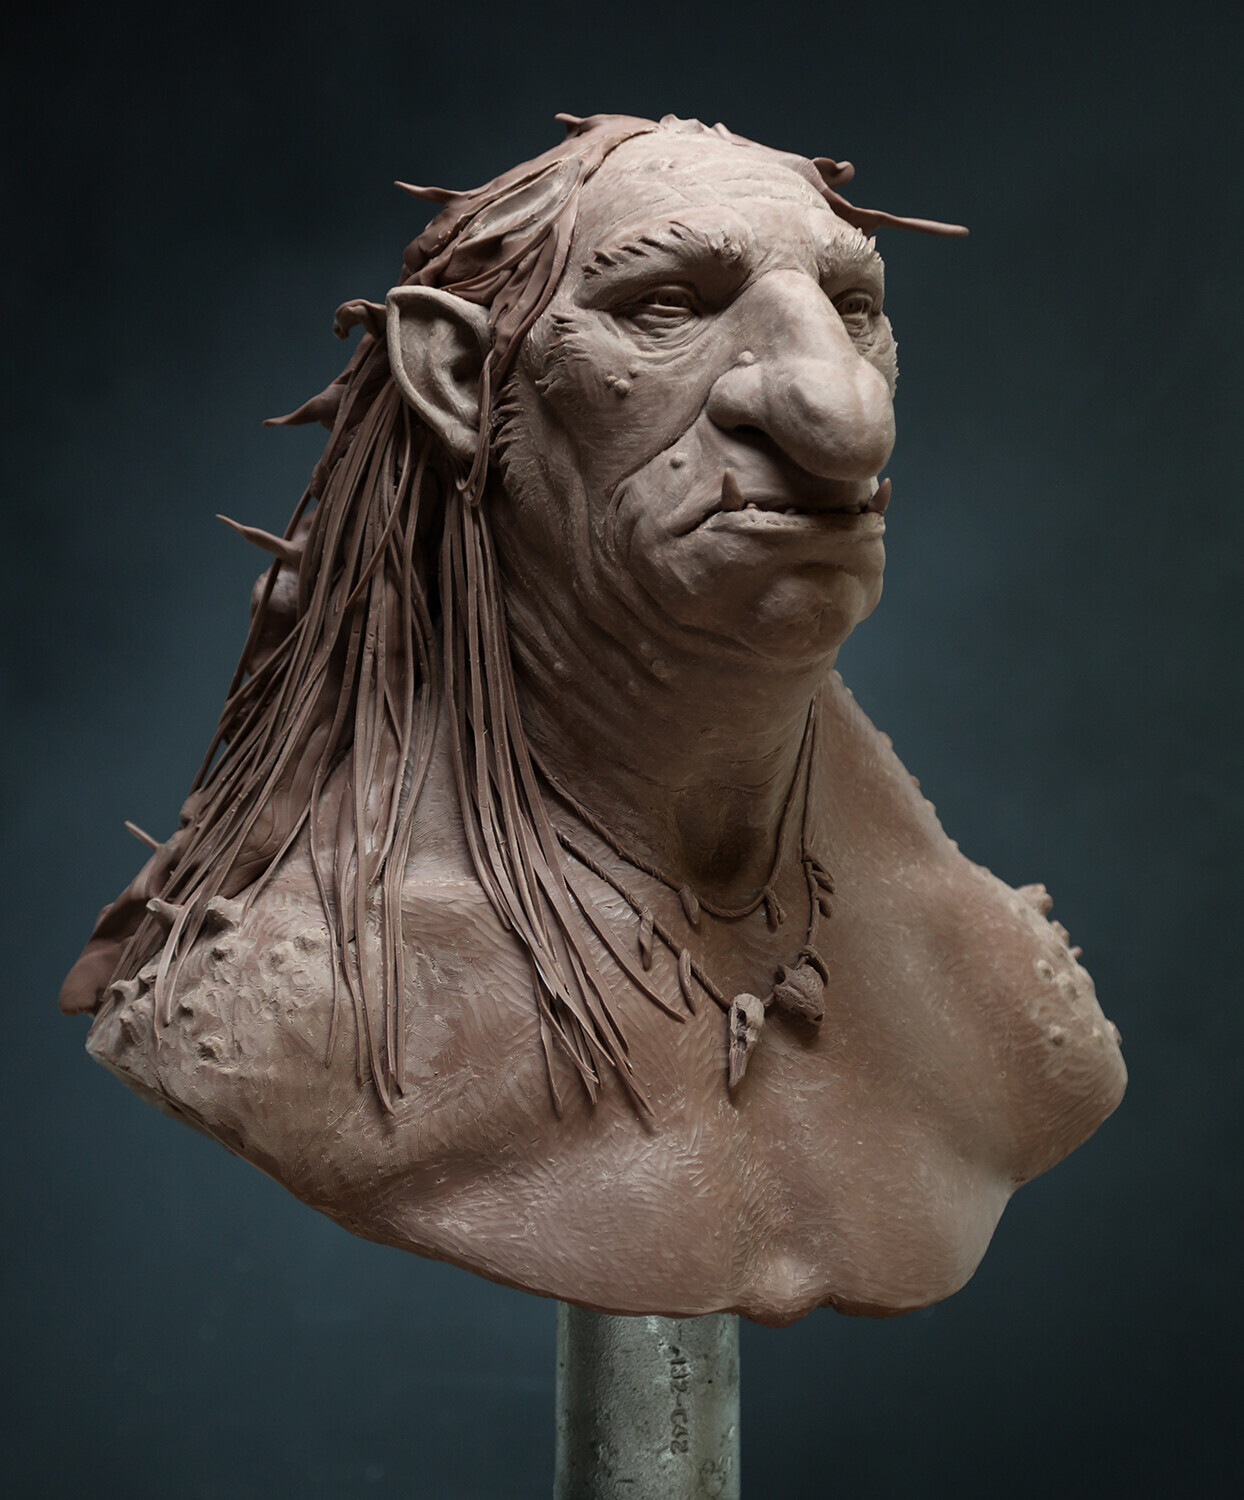 Artemis Fowl 2017, Troll Concept Bust (Original Concept by Rob Bliss)